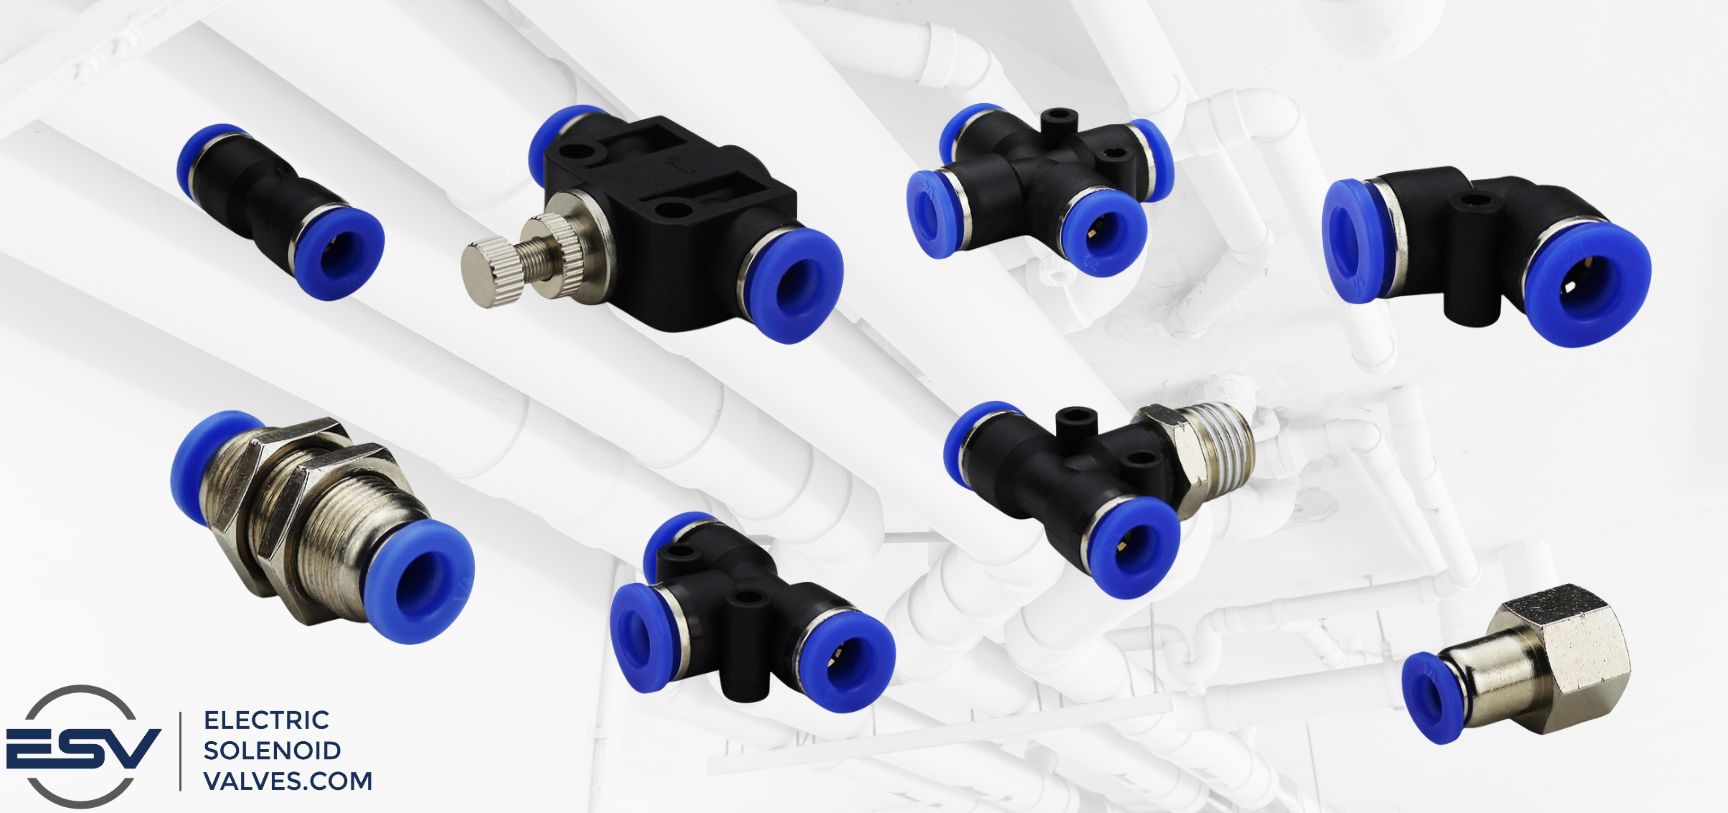 Push connect fittings for air control of systems with pneumatic solenoid valves